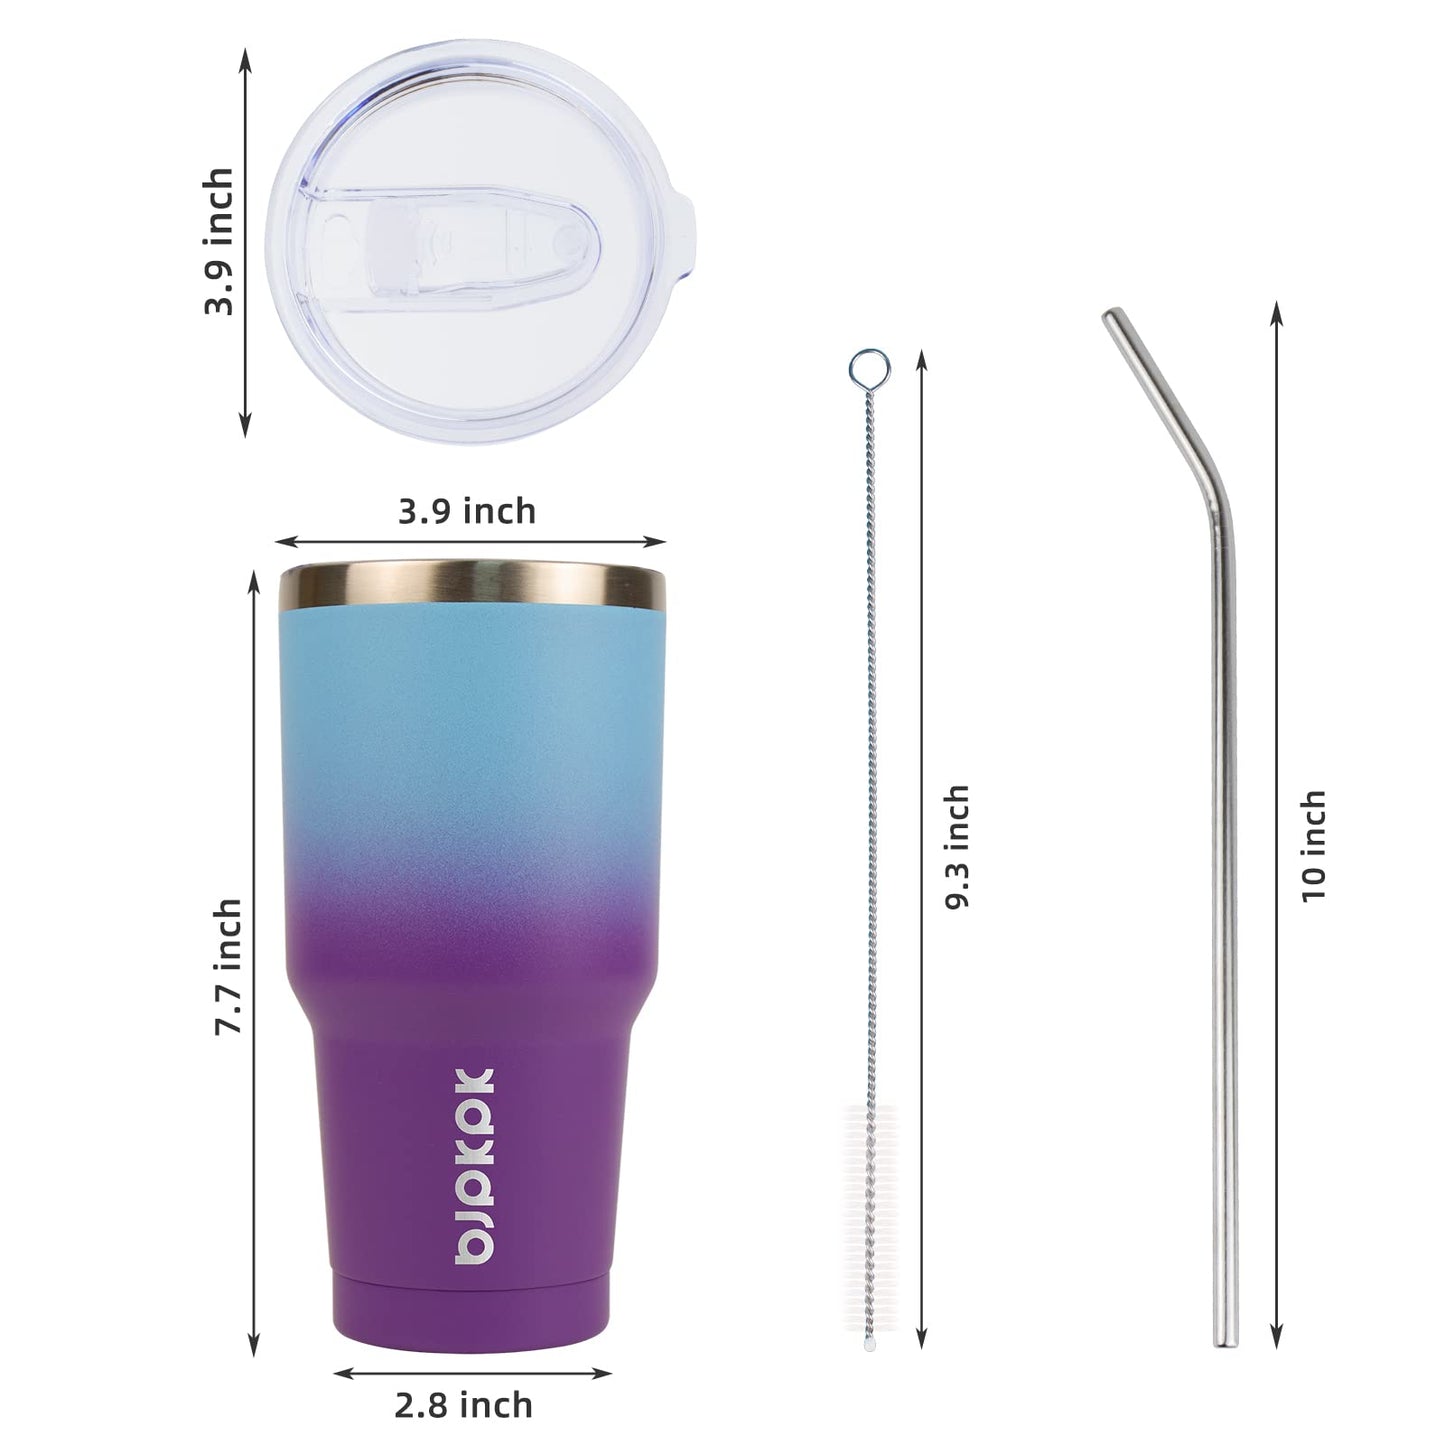 BJPKPK 30oz Color Block Tumbler With Lid And Straw,Stainless Steel Double Wall Vacuum Insulated Tumblers,Ocean Dream